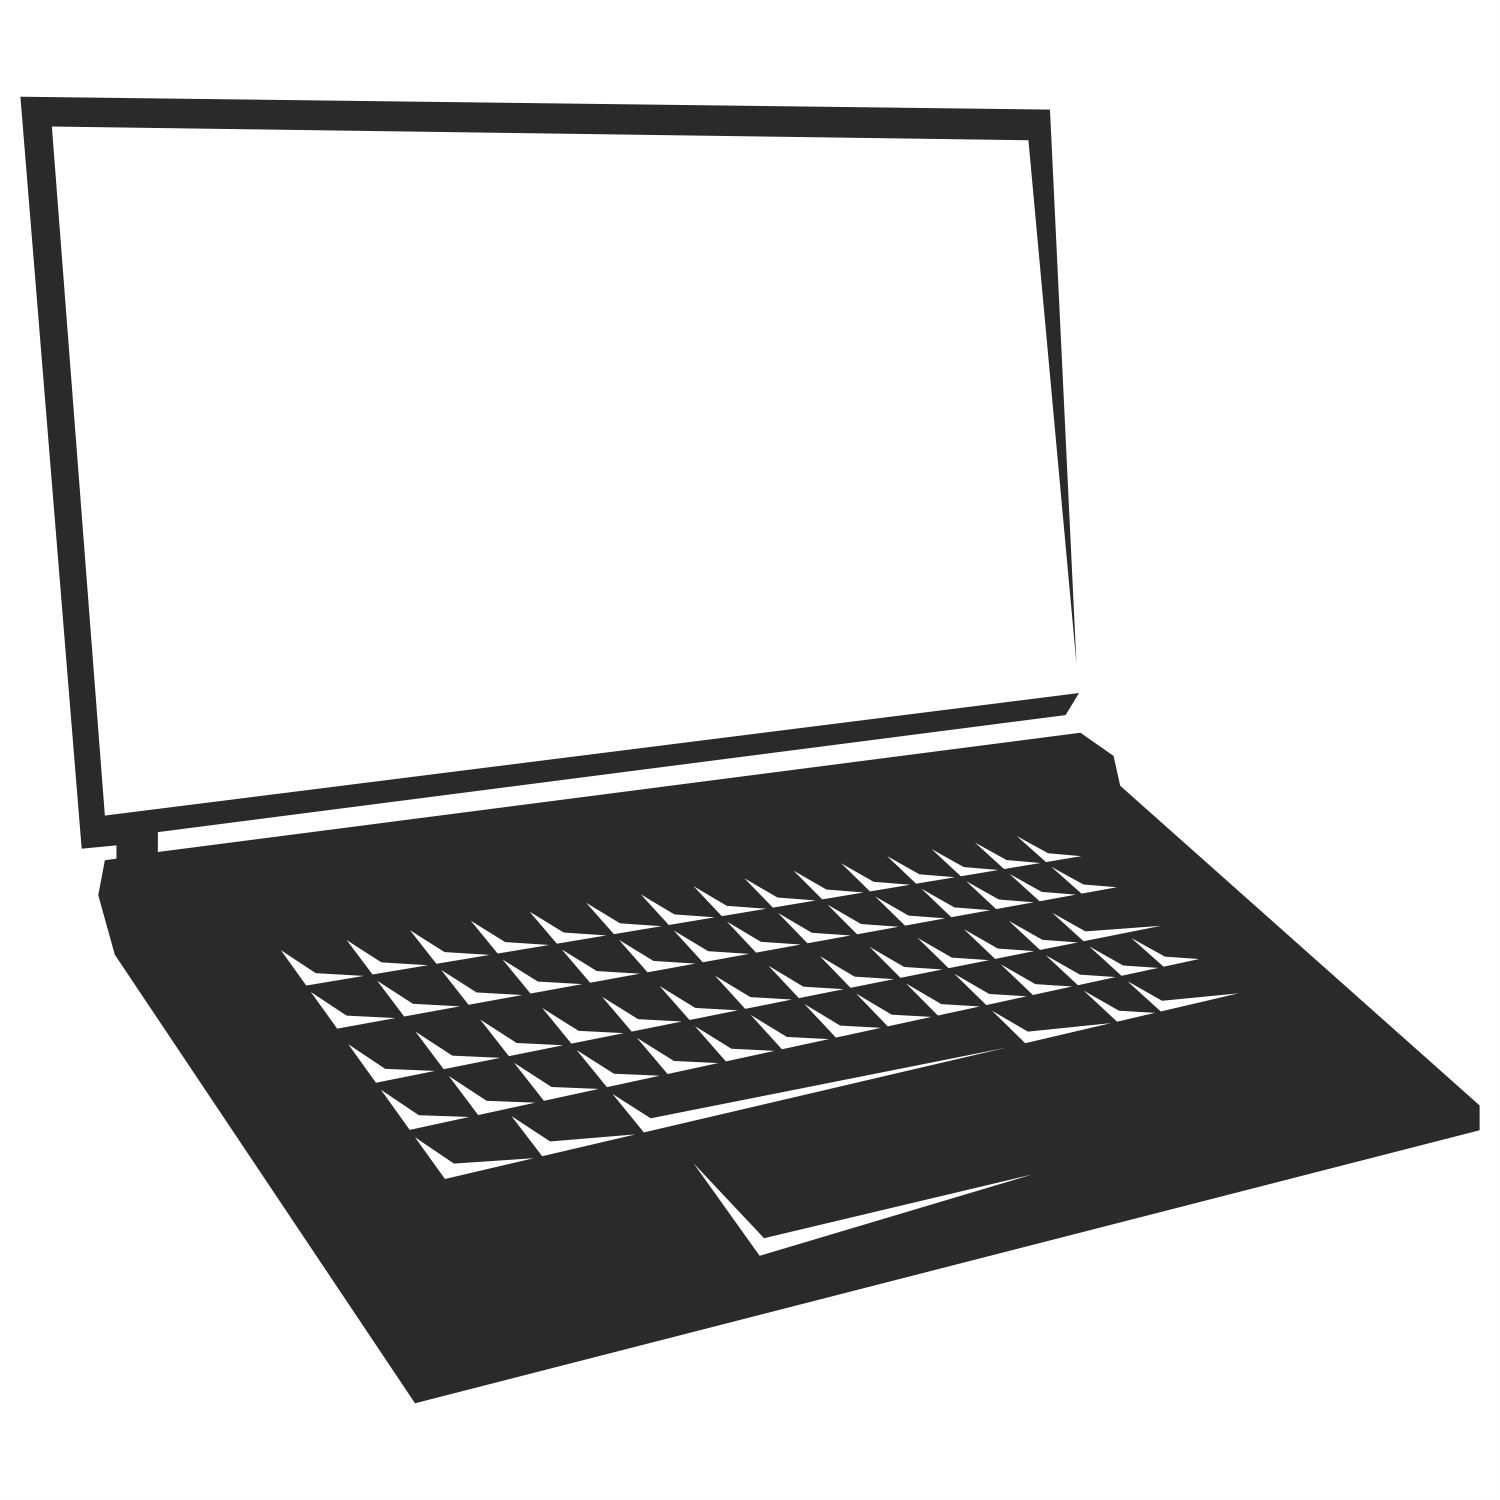 Laptop Clipart Clipart Free Download 4 - Laptop Black And White, Transparent background PNG HD thumbnail